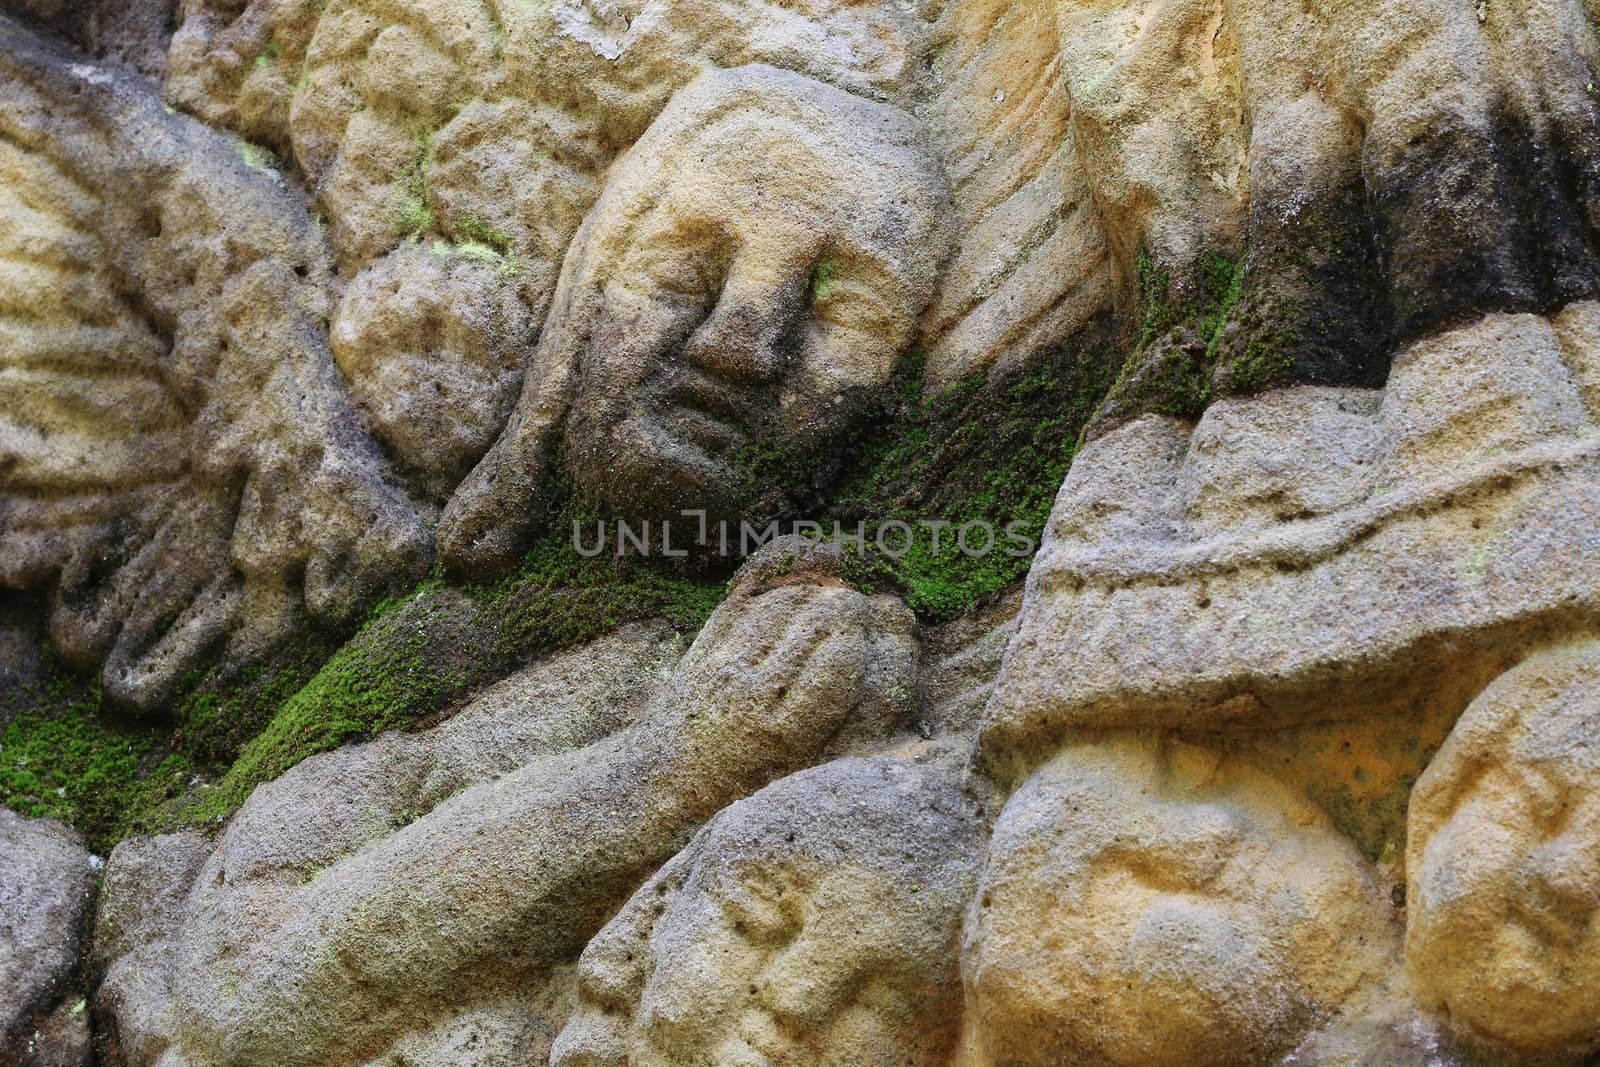 Stone altar carved into the sandstone - detail of the head of a praying angel.
Stone altar carved in sandstone cliff in the forest near the village Marenicky, Lusatian Mountains, Czech Republic.
